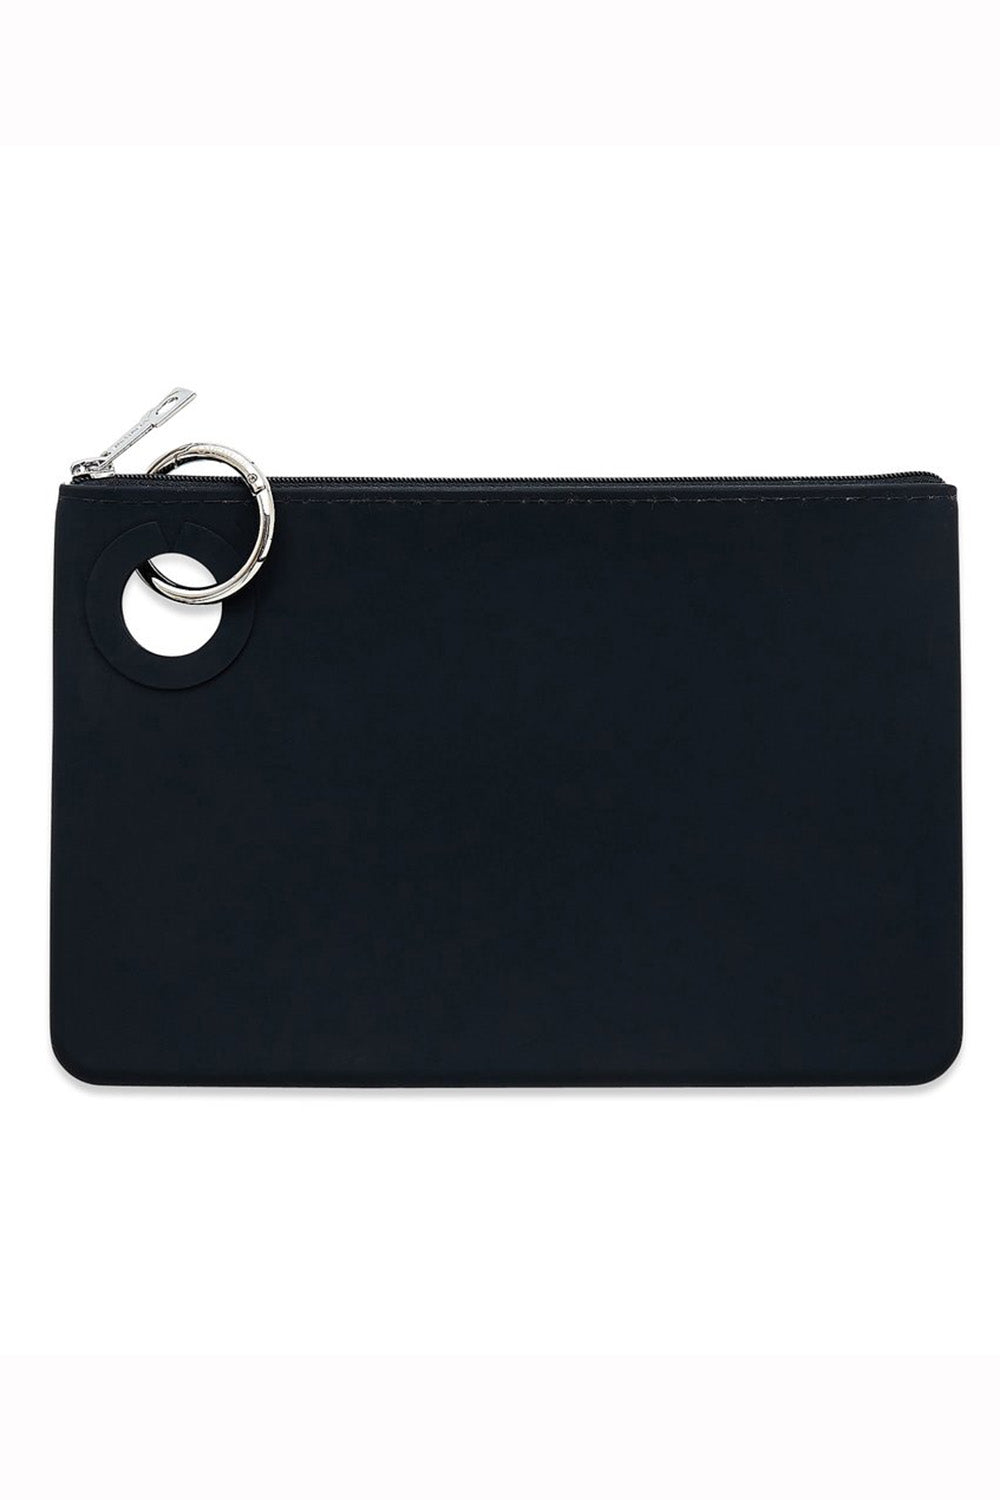 Silicone Pouch Large - Solid Back in Black